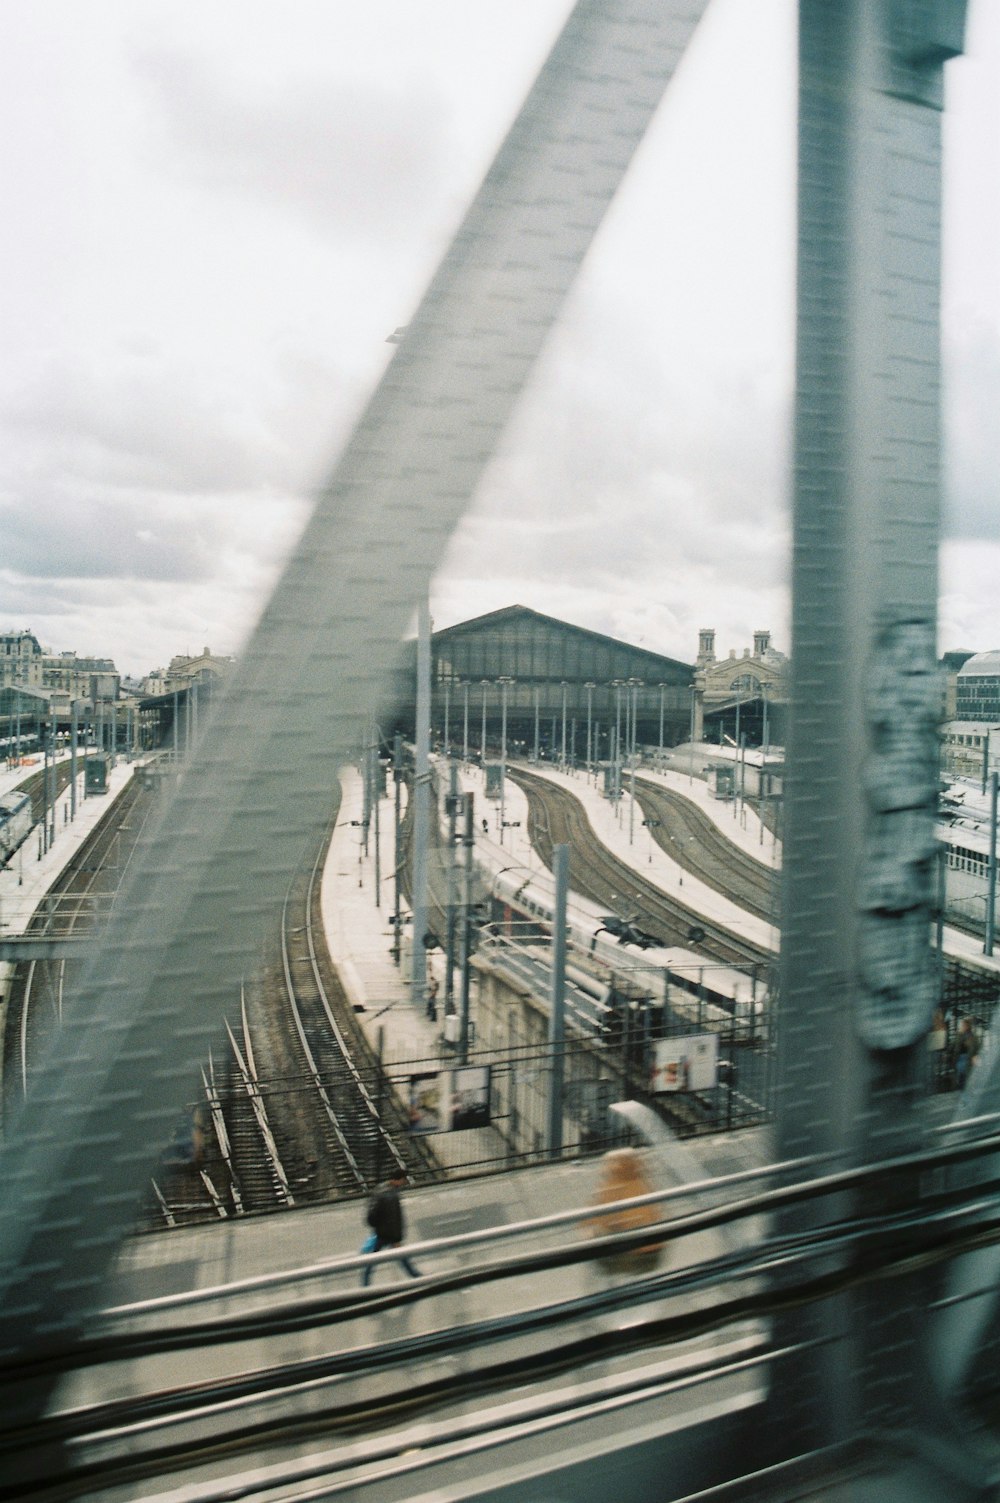 a view of a train station from a moving train